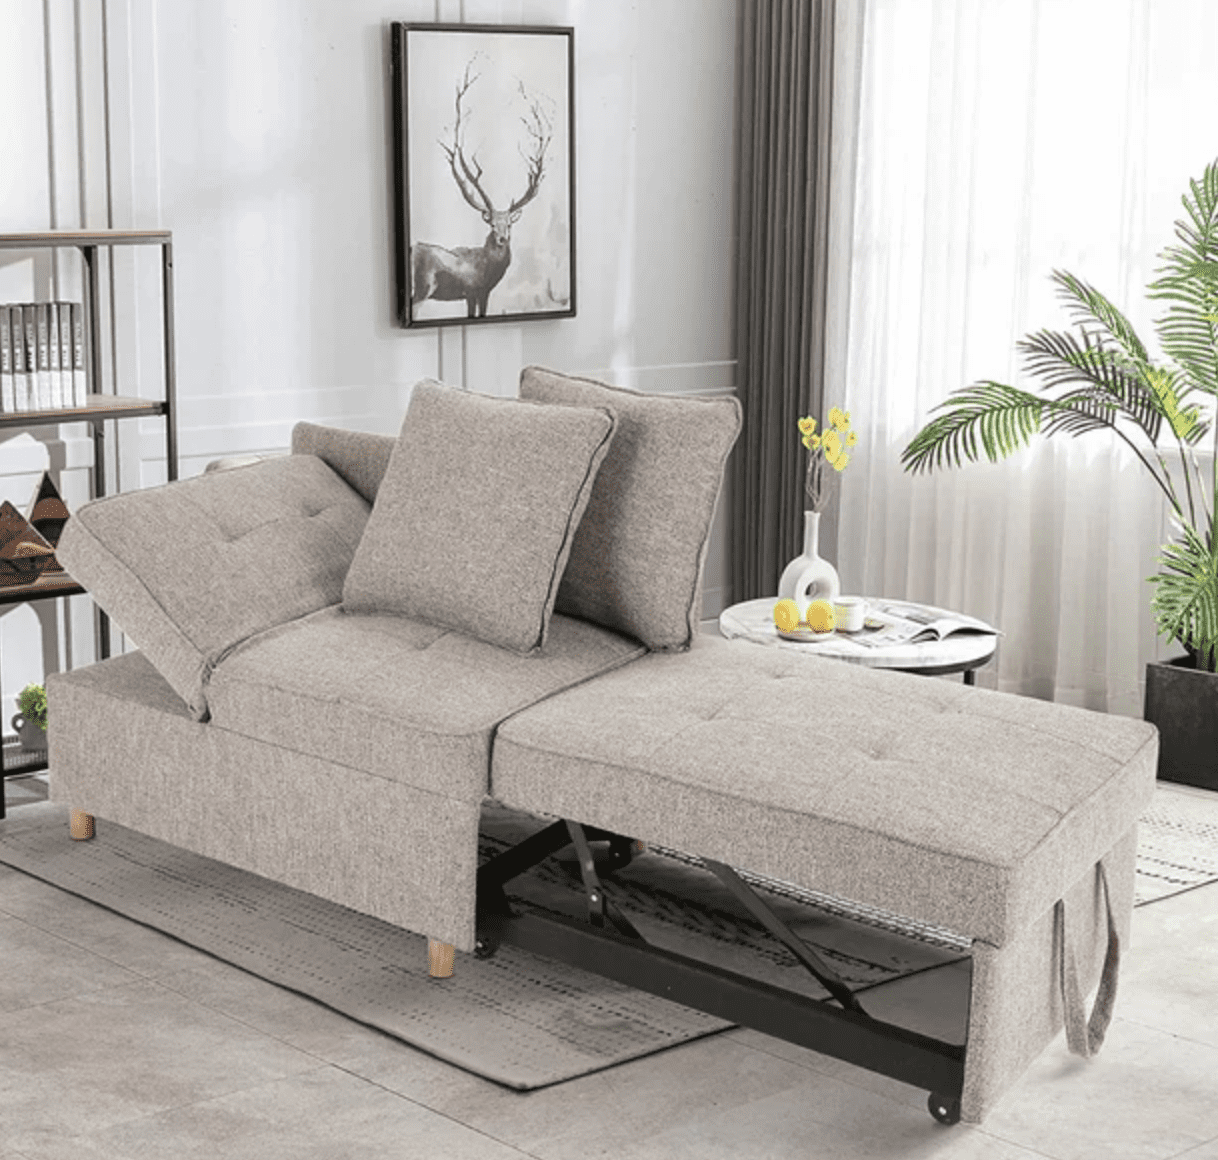 Walmart 4 In 1 Convertible Sofa: It's Perfect For Small Spaces | Apartment  Therapy Regarding 4 In 1 Convertible Sleeper Chair Beds (View 6 of 15)